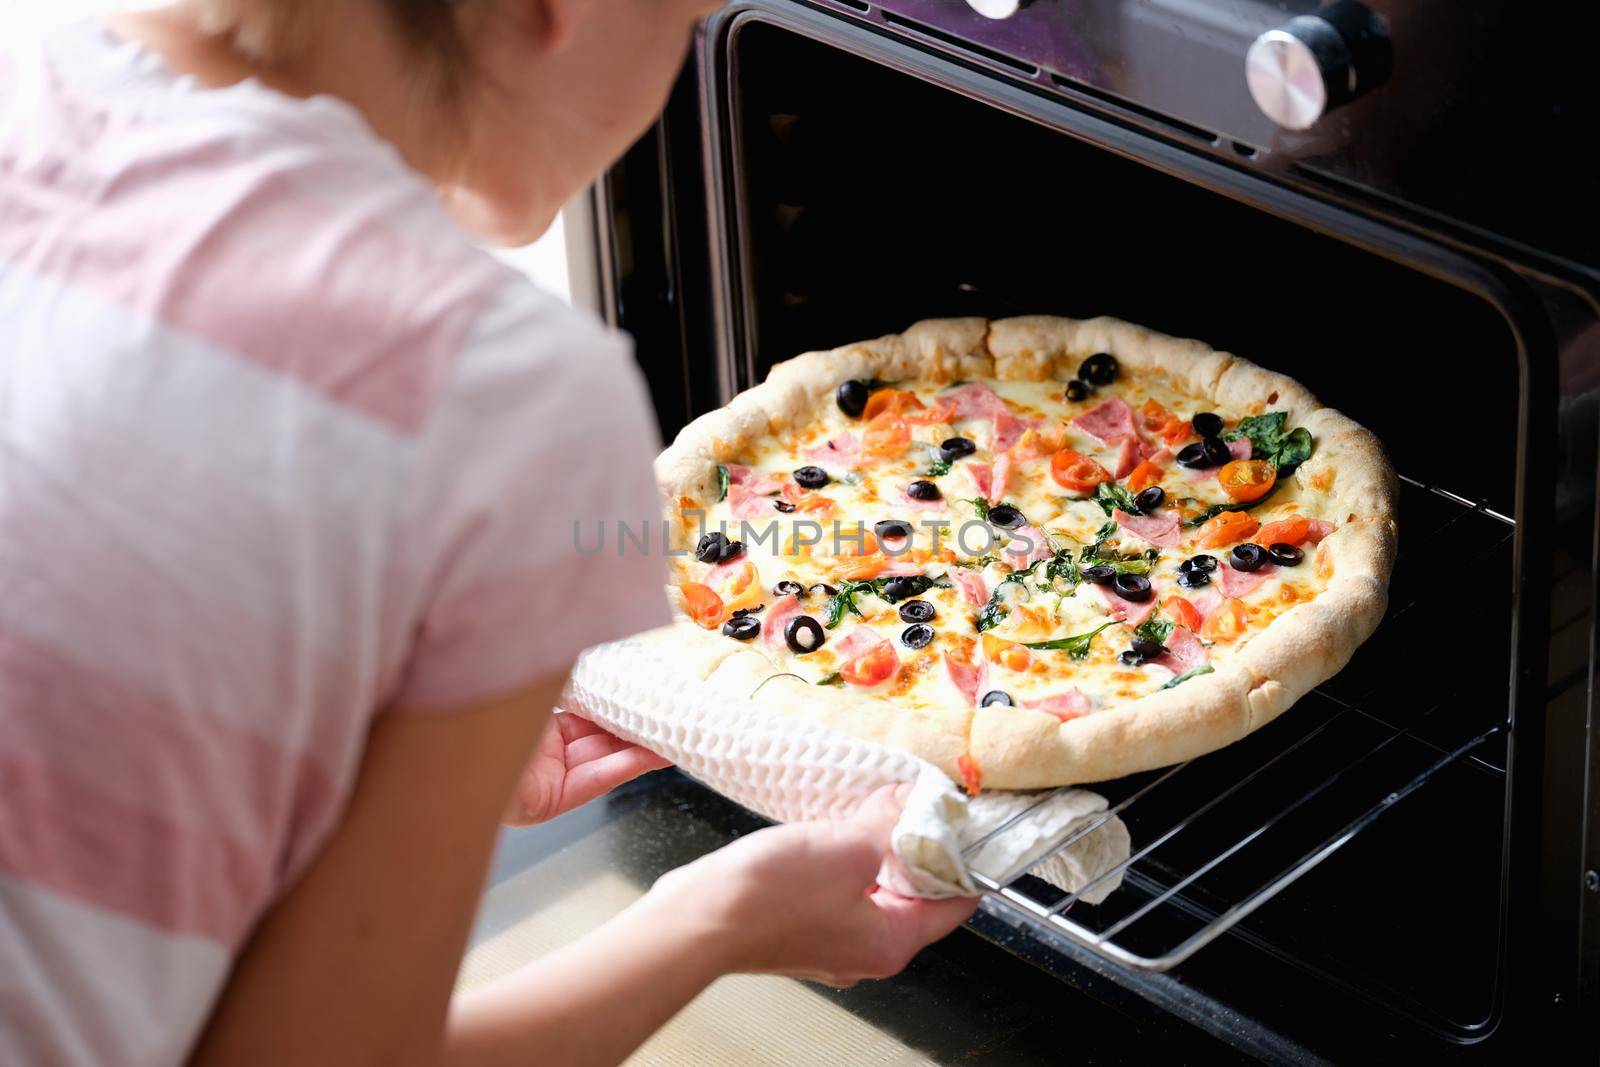 A woman takes out a round homemade pizza from the oven, close-up. Home kitchen appliances for cooking